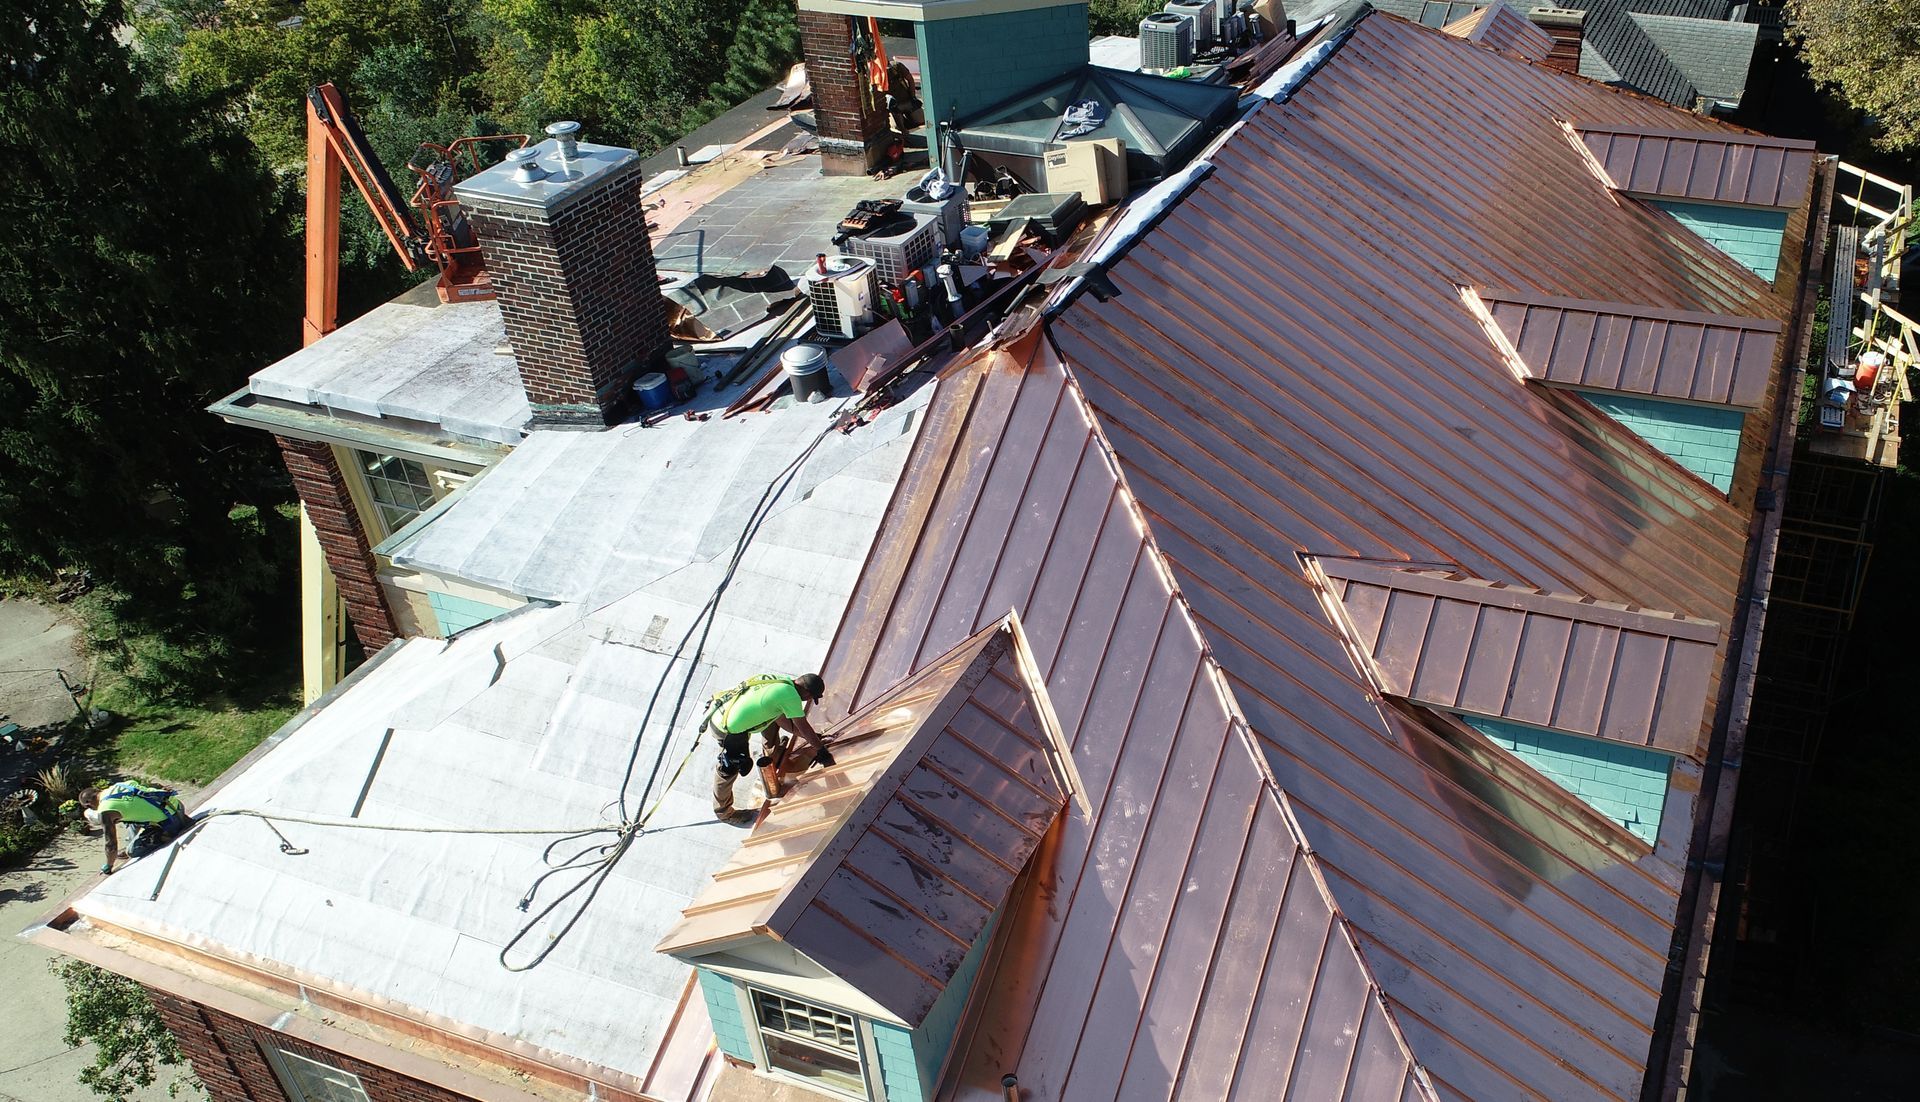 Precision-crafted copper standing seam roof and flashings